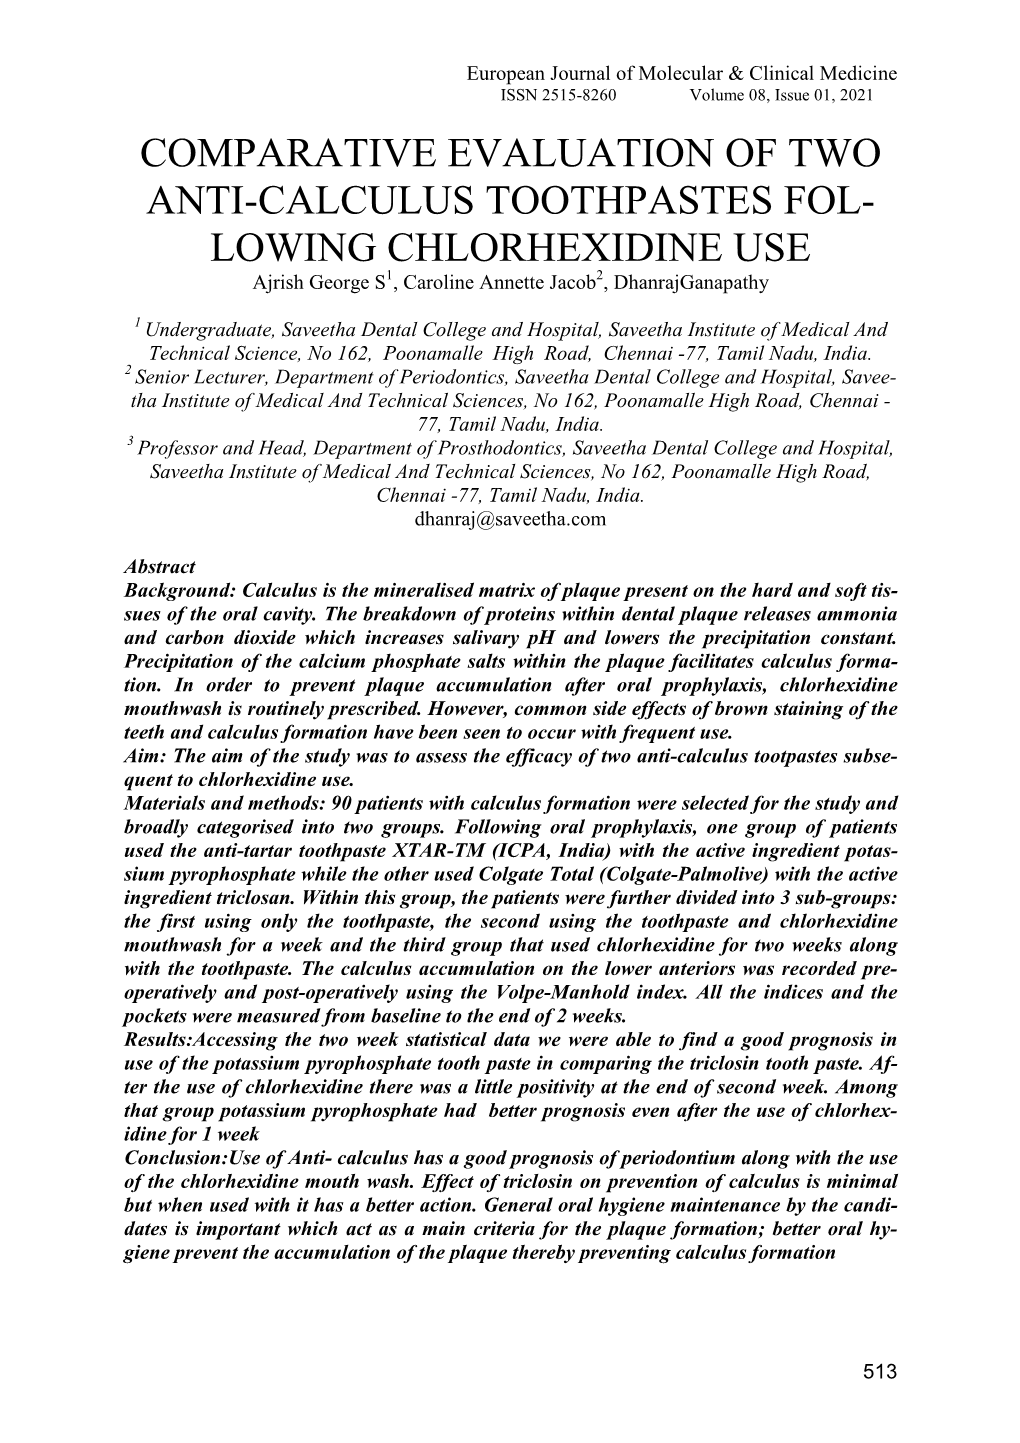 COMPARATIVE EVALUATION of TWO ANTI-CALCULUS TOOTHPASTES FOL- LOWING CHLORHEXIDINE USE Ajrish George S1, Caroline Annette Jacob2, Dhanrajganapathy